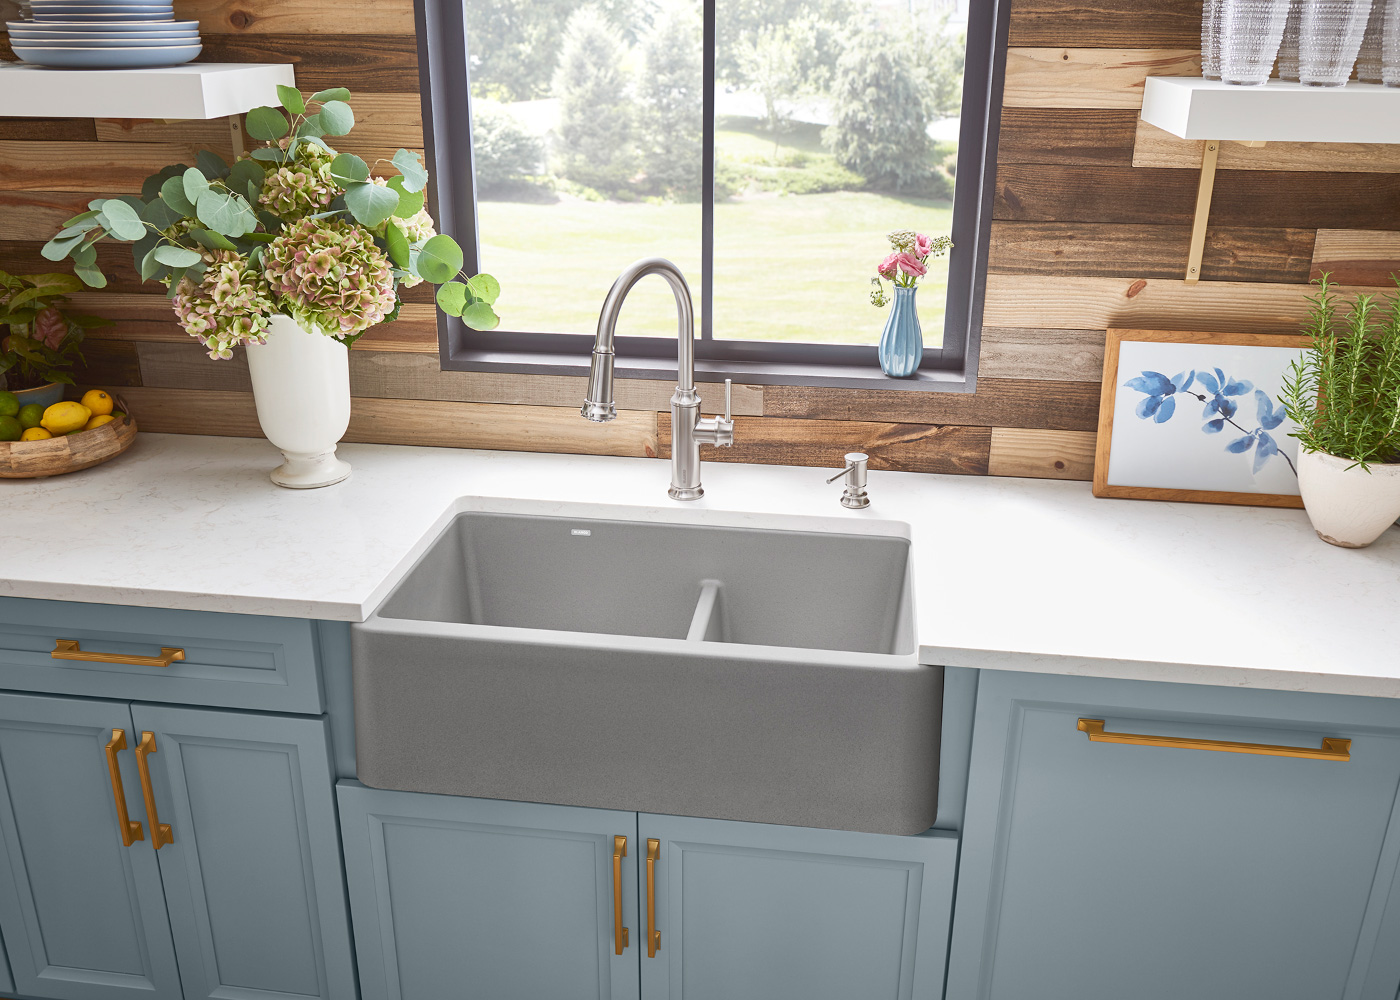 Interior photo of a BLANCO kitchen with neutral sink